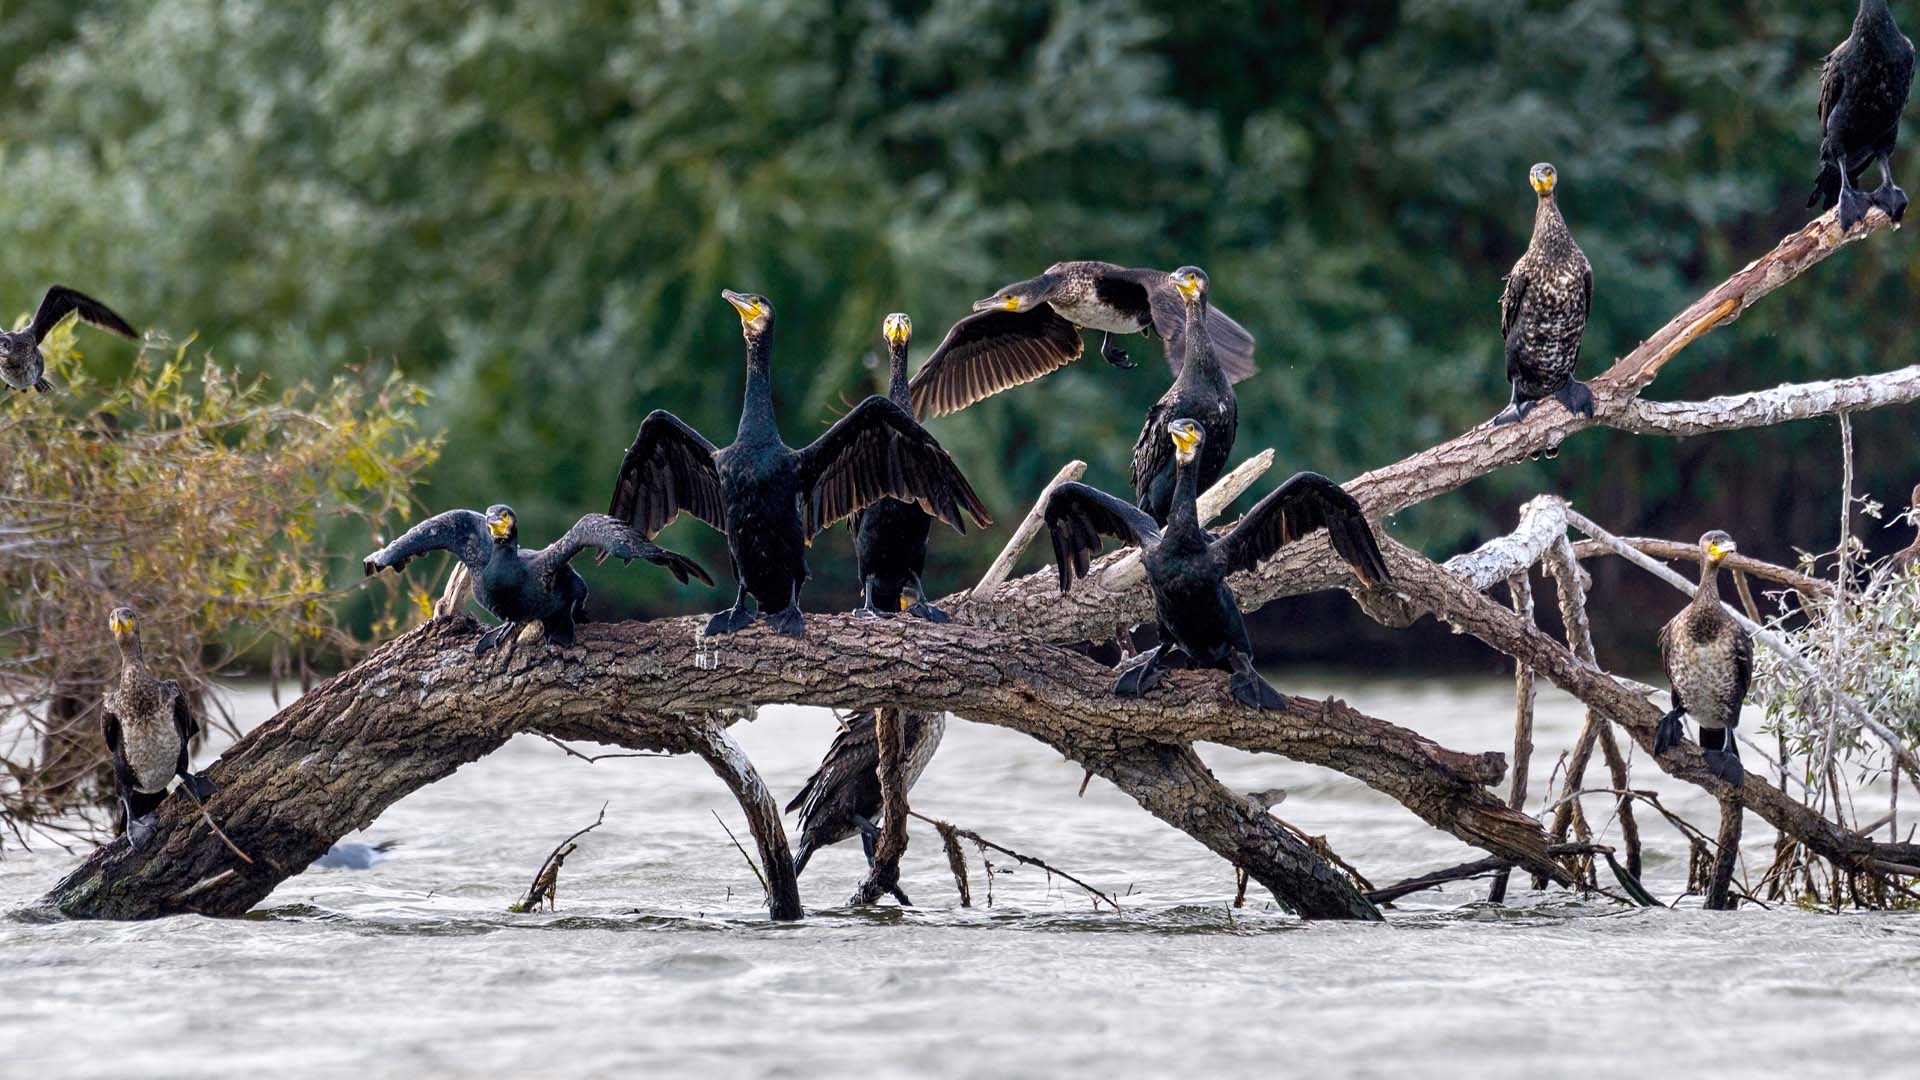 Cormorant and fisheries, Environmental concerns, Avian impact, Angling challenges, 1920x1080 Full HD Desktop